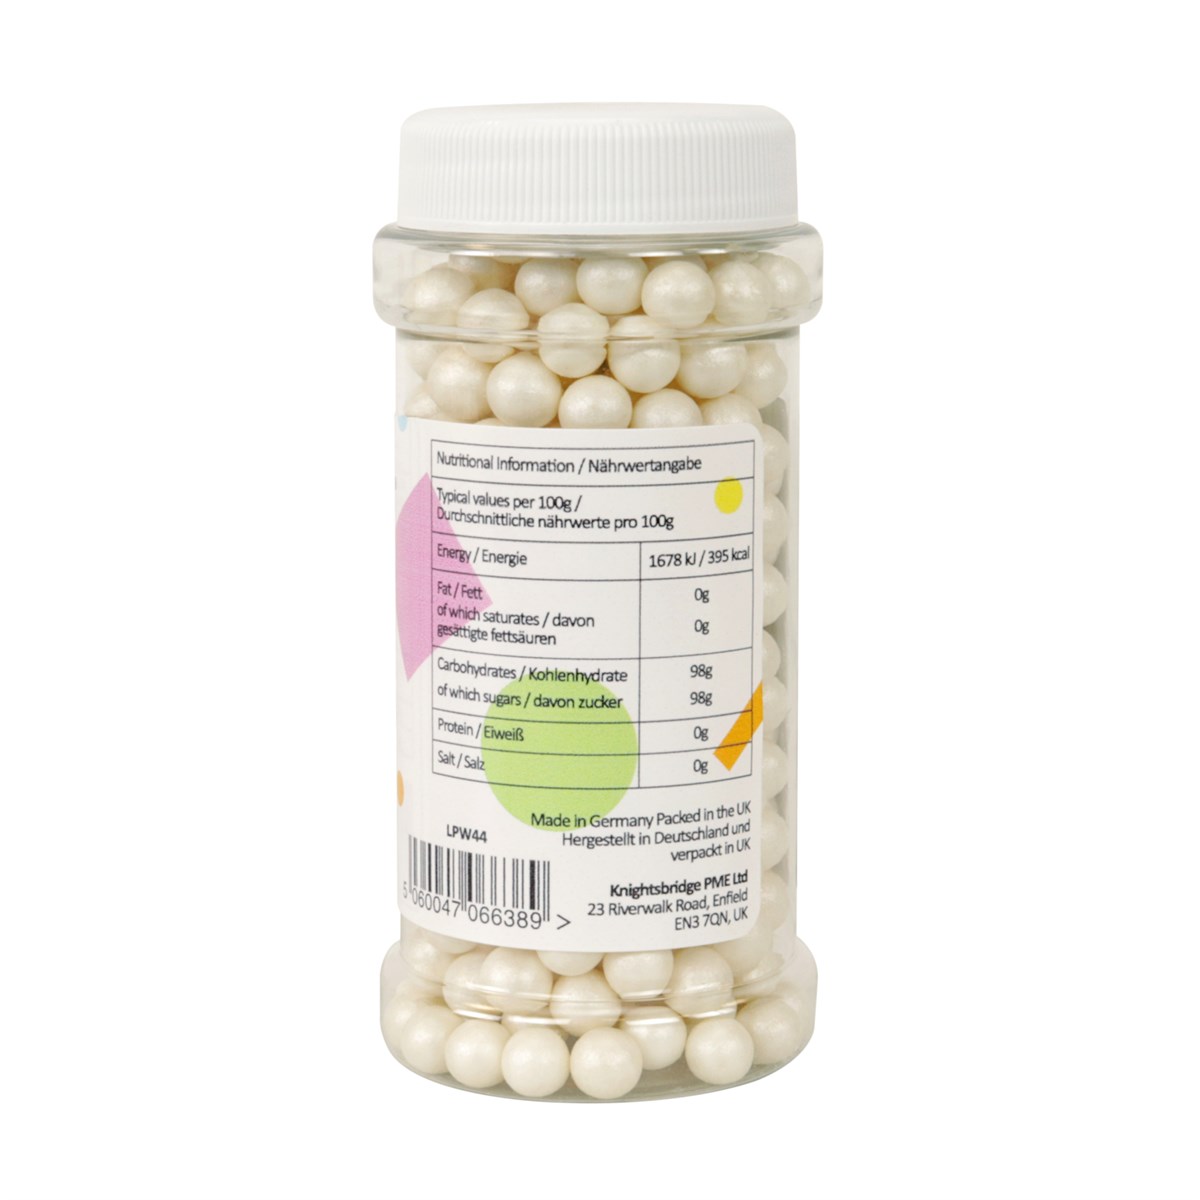 White Grande Pearls - 4oz – Bean and Butter